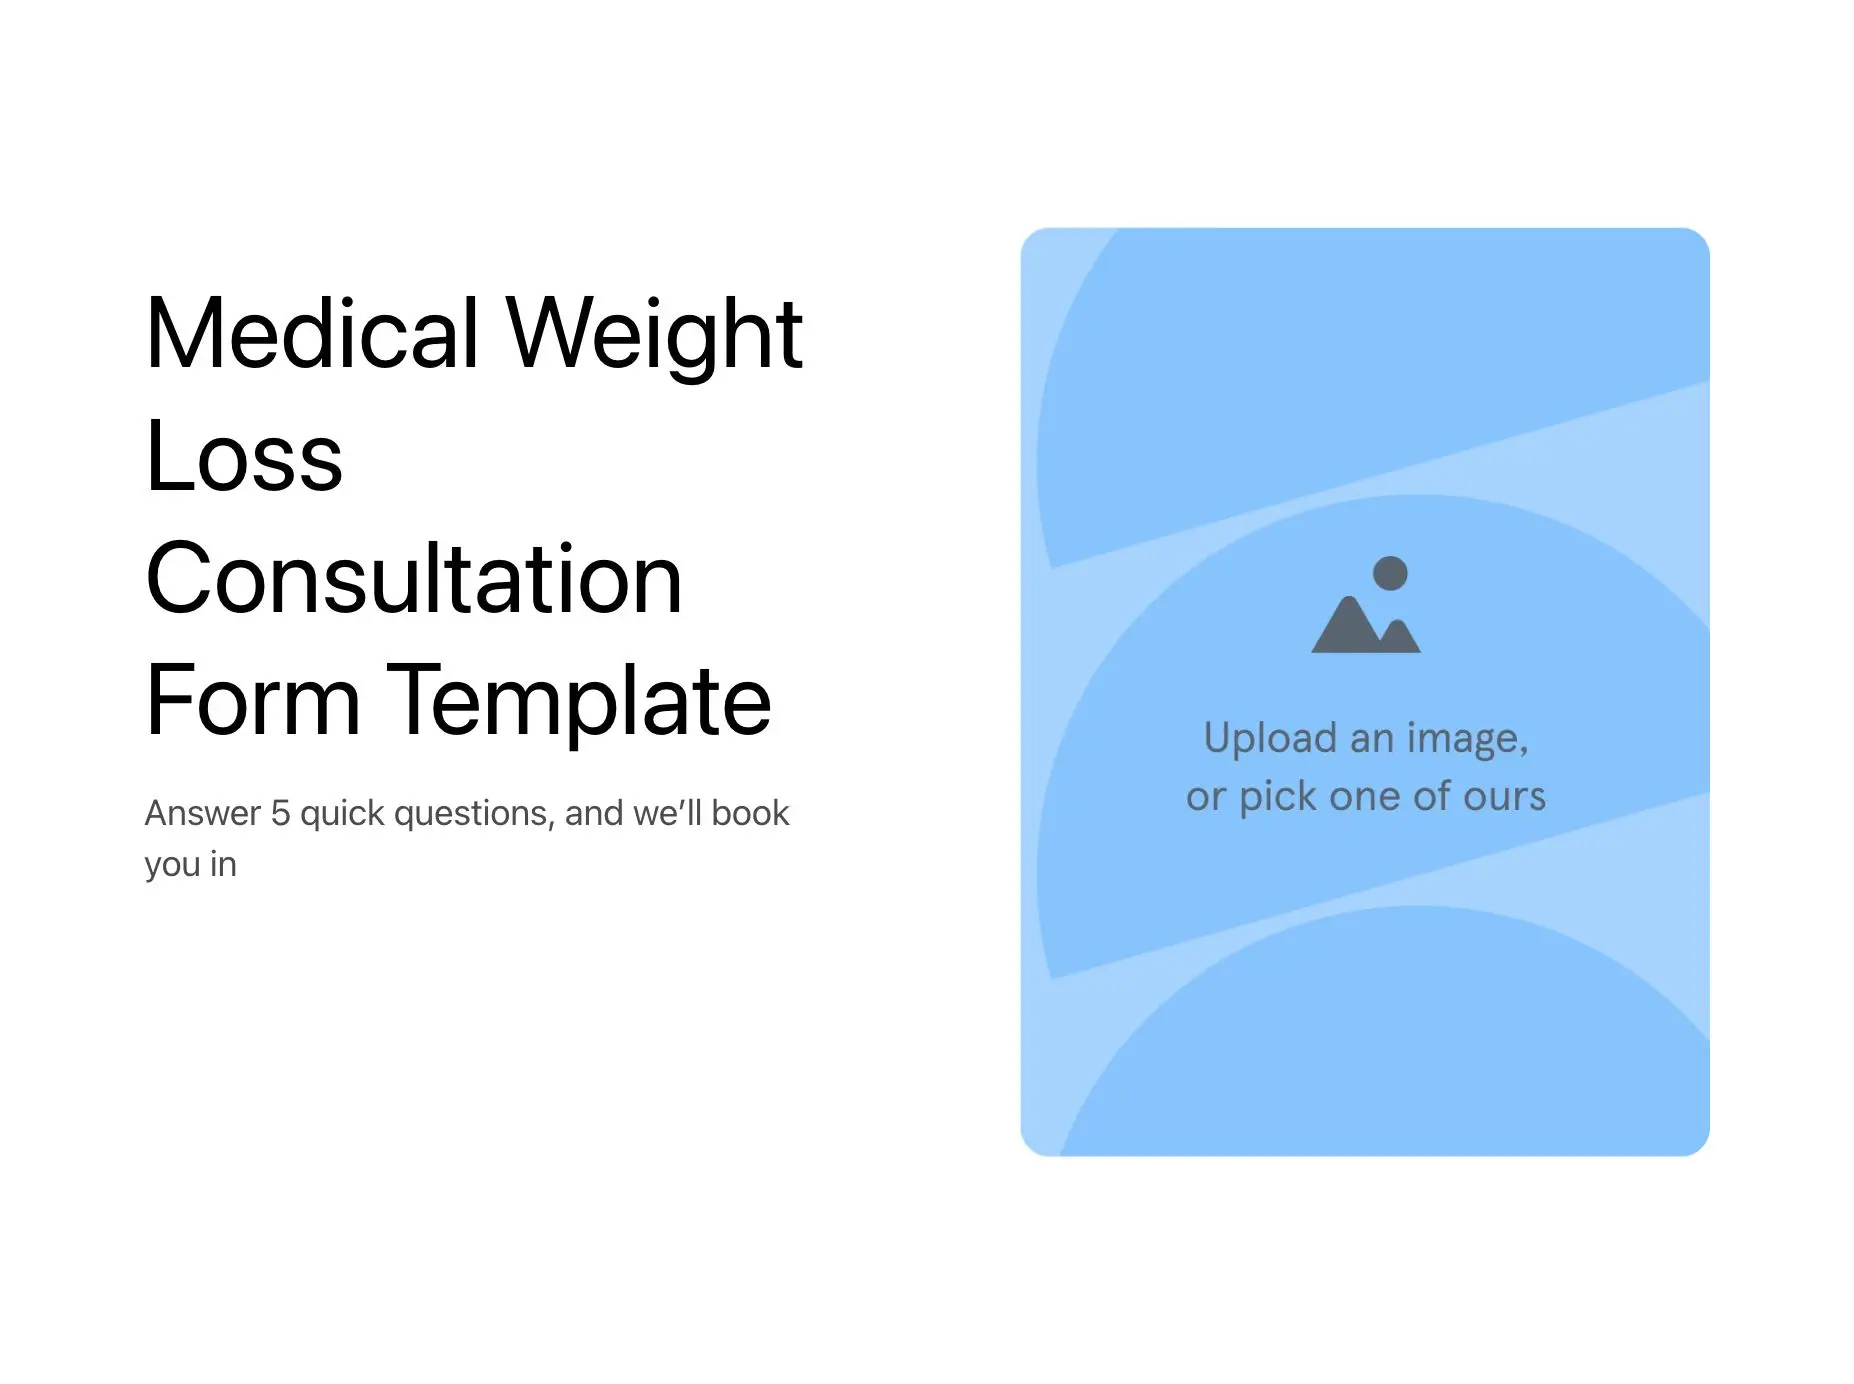 Medical Weight Loss Consultation Form Template Hero